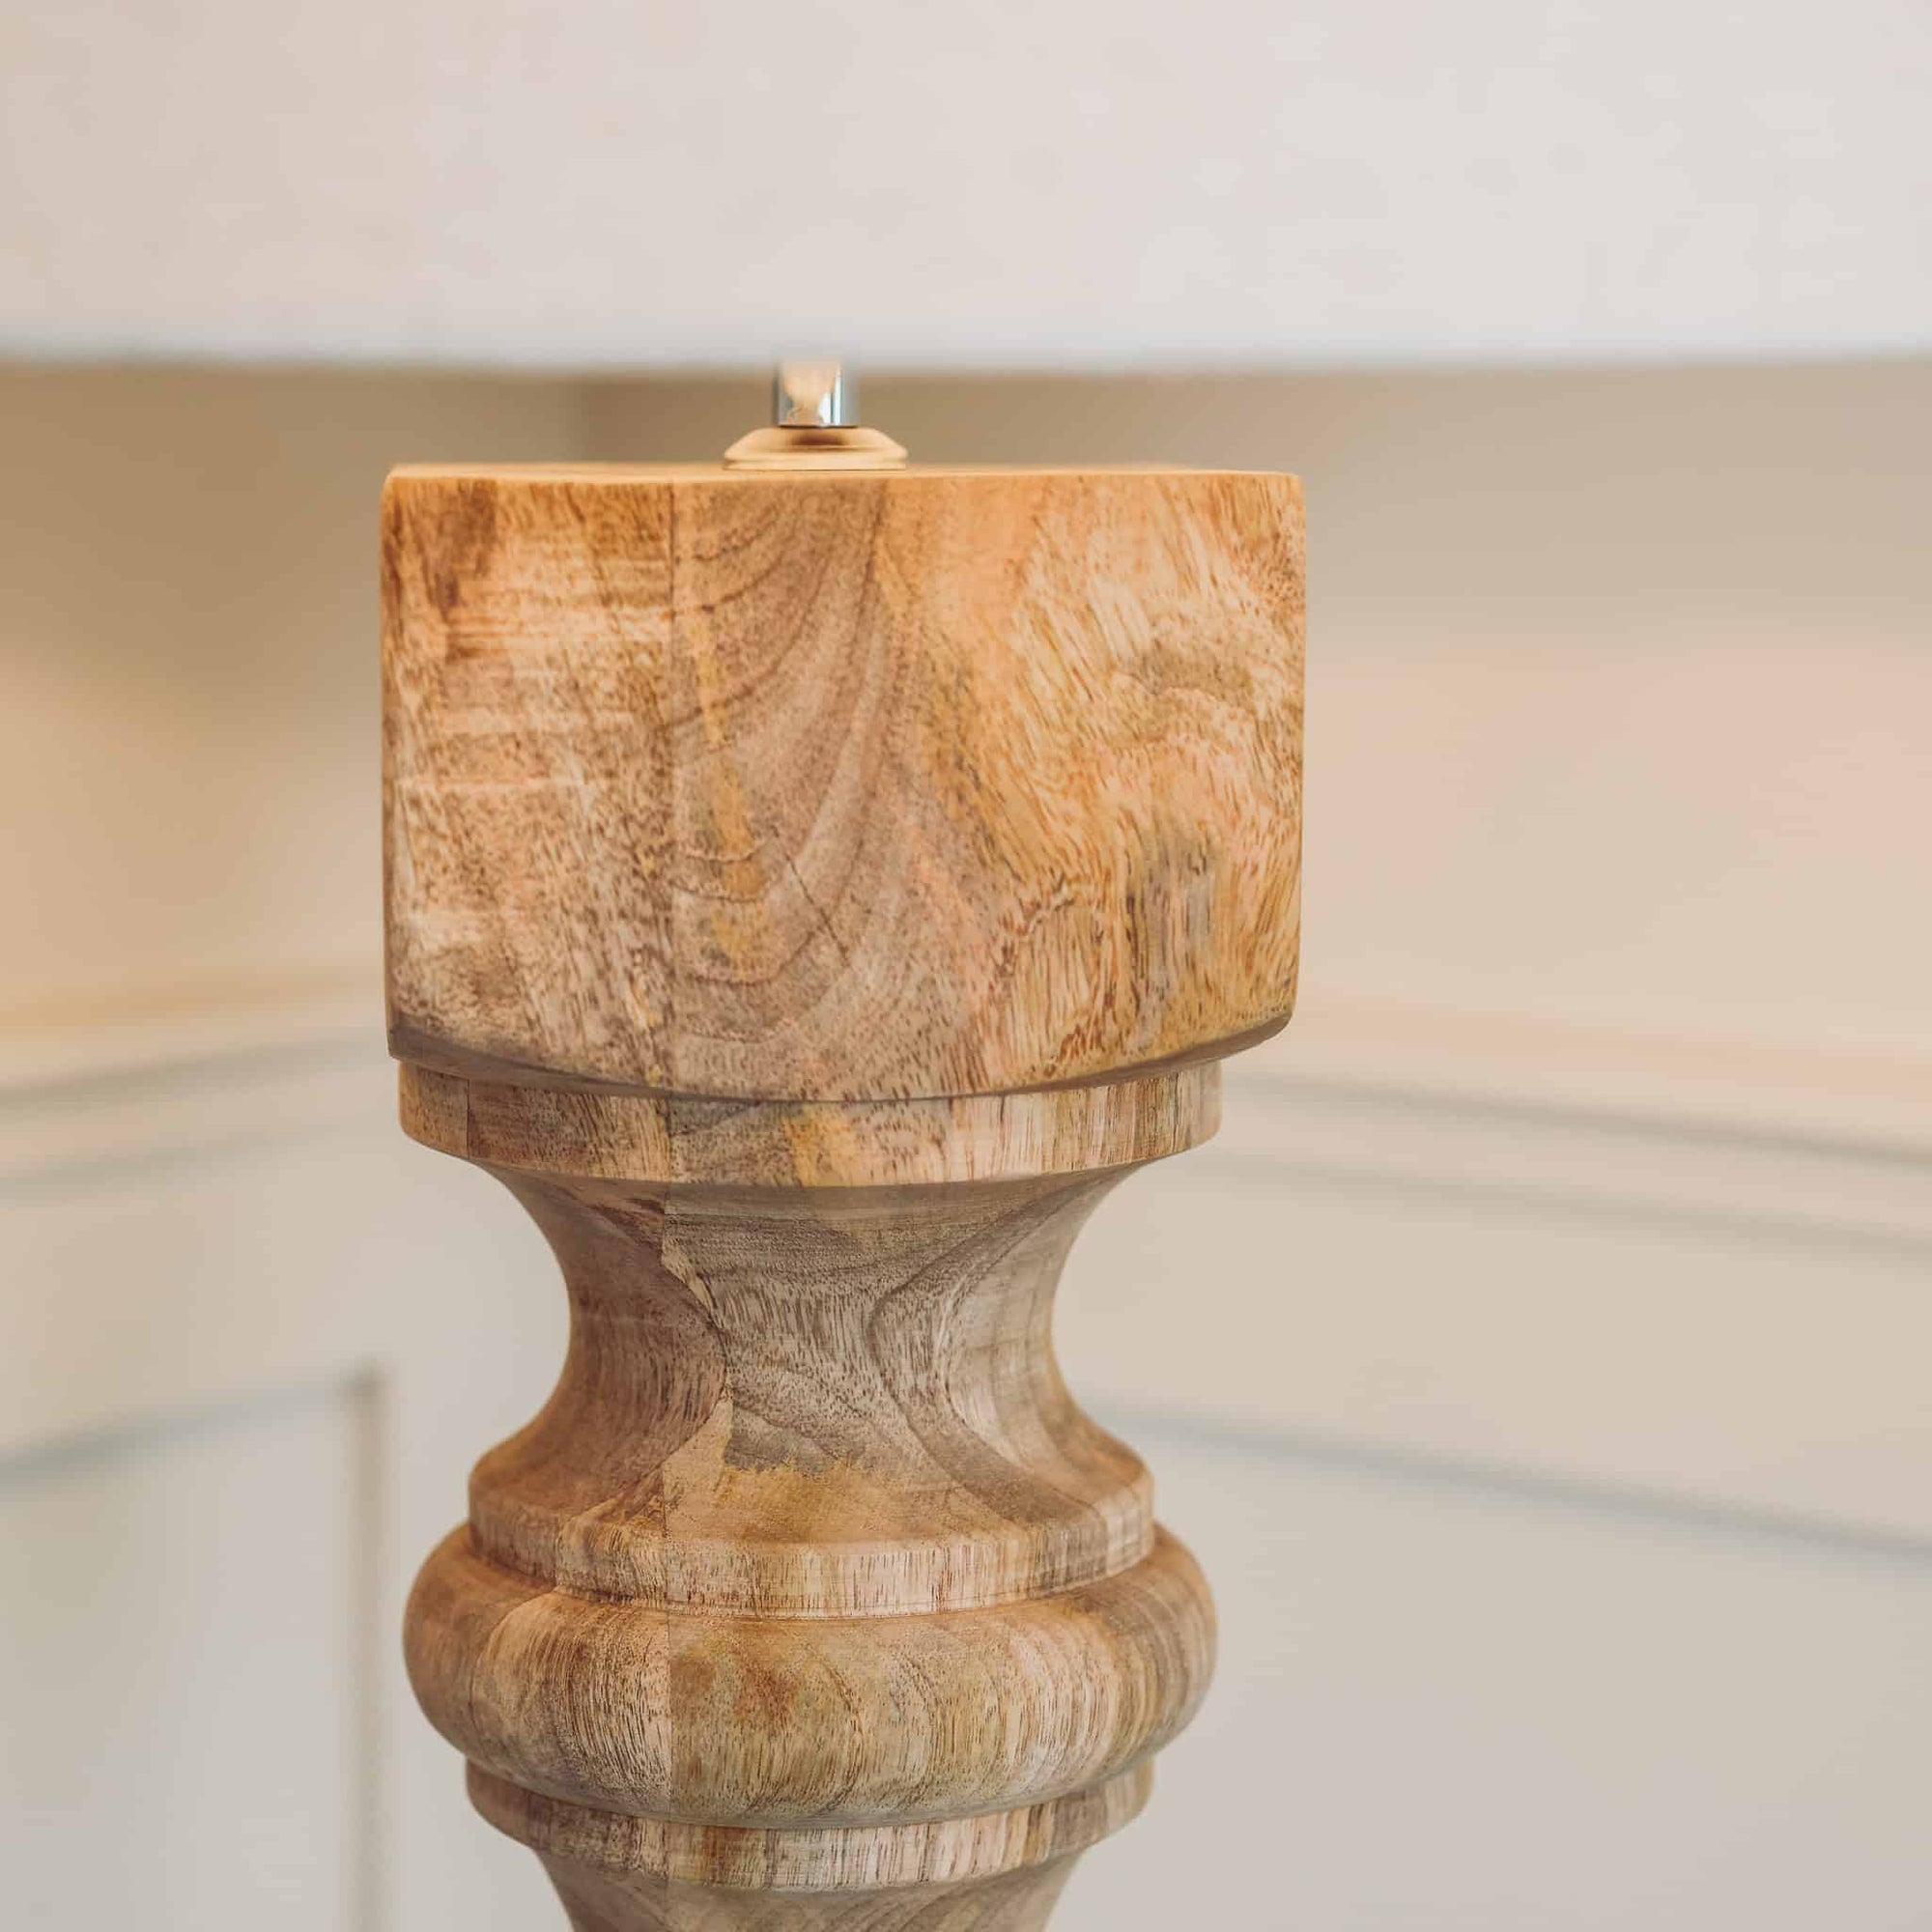 Close up of wooden lamp base with natural grain.